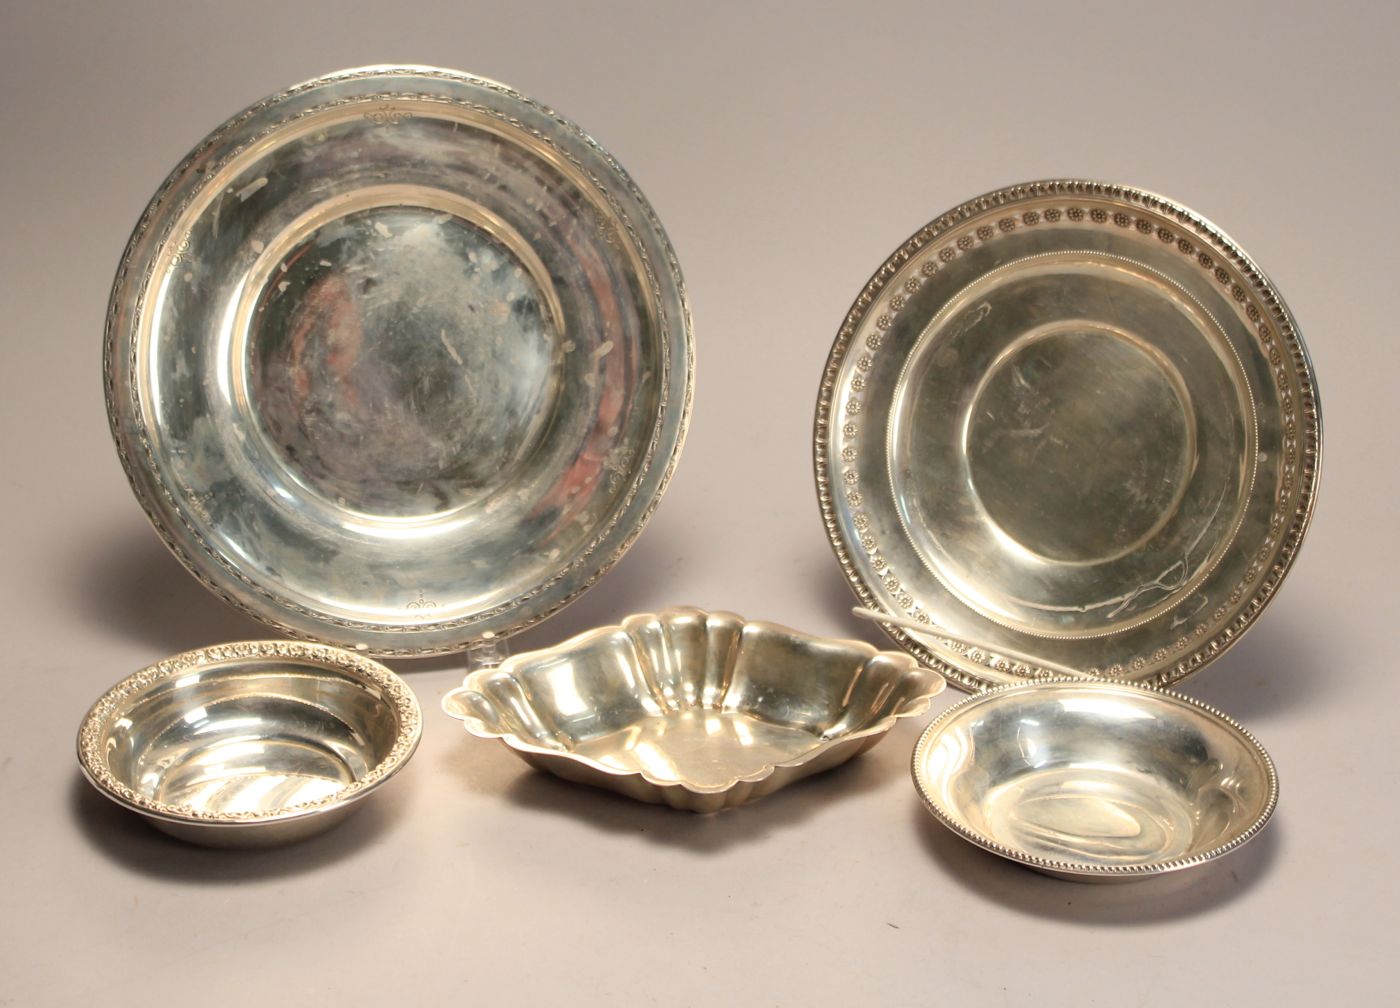 FIVE PIECES OF STERLING SILVER HOLLOWWAREBy